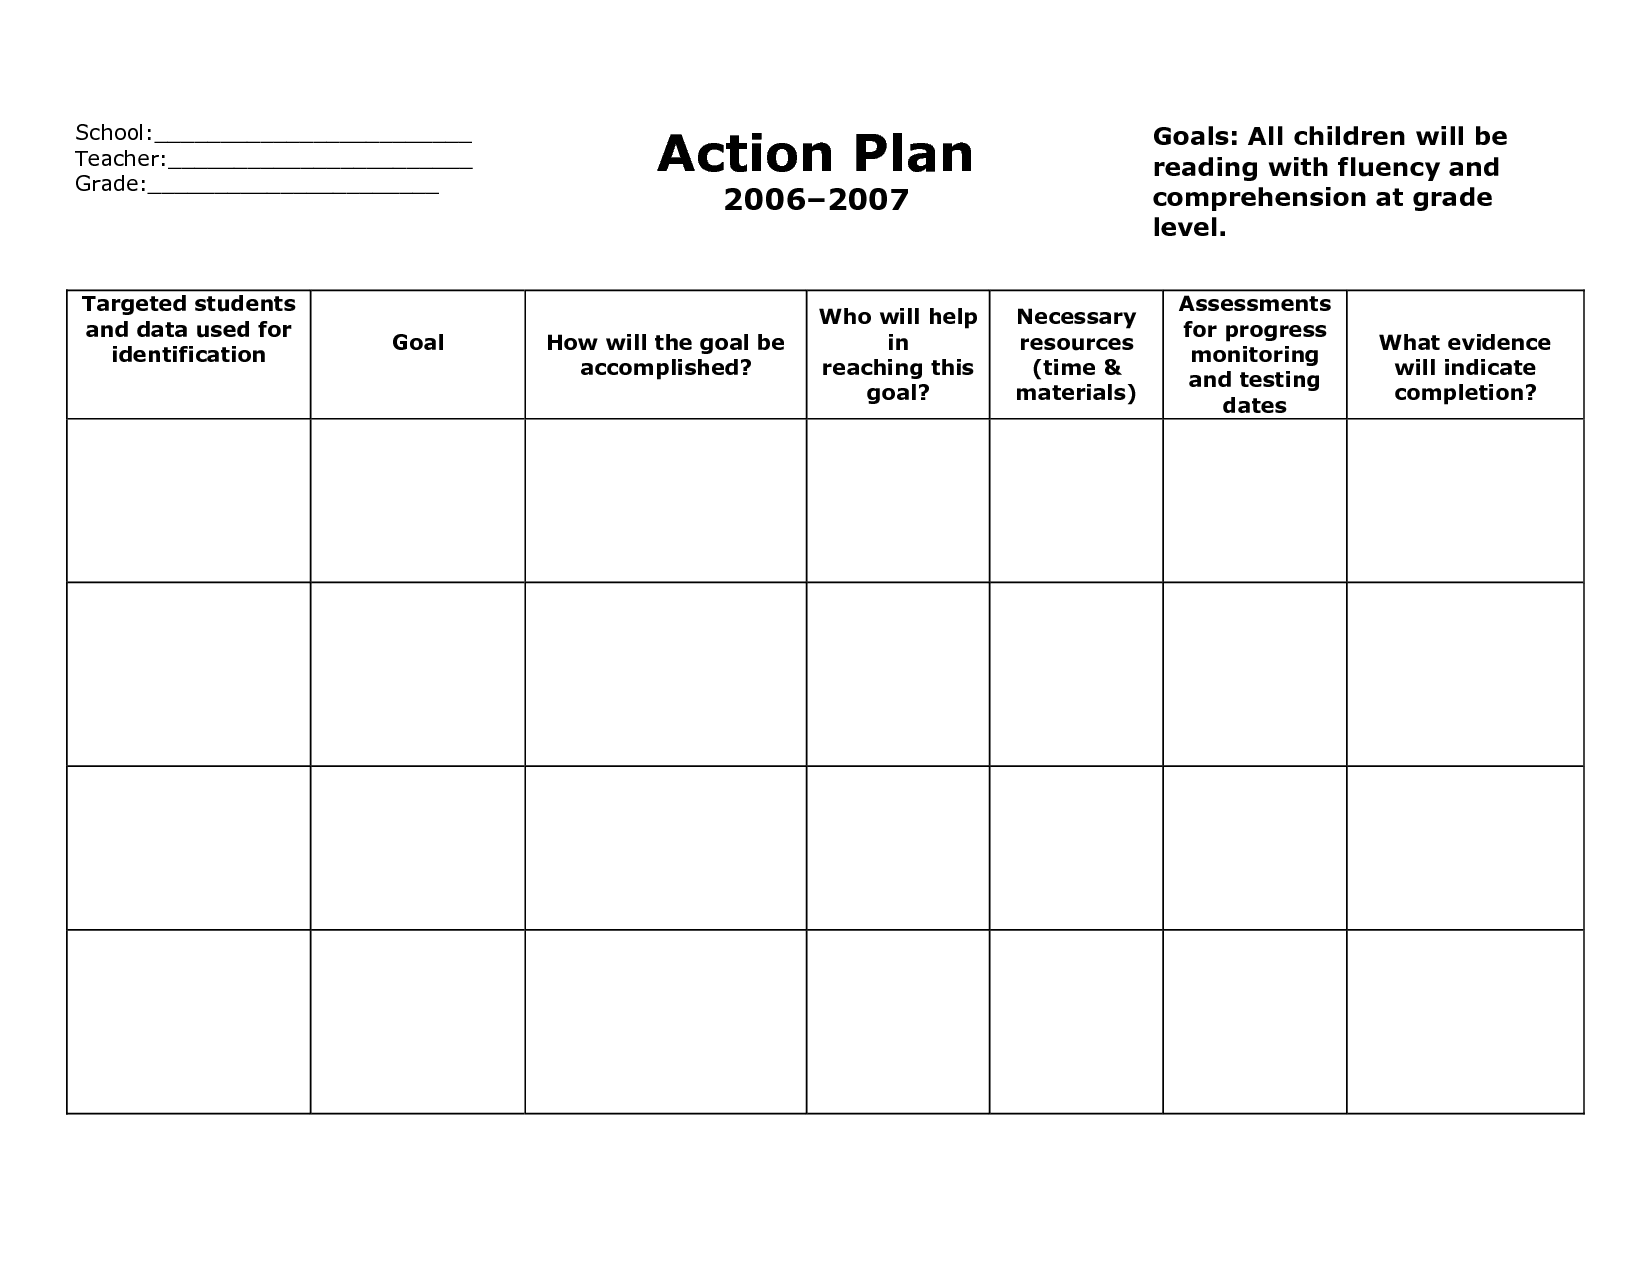 action plan template microsoft best business kd7 | news alwaled 